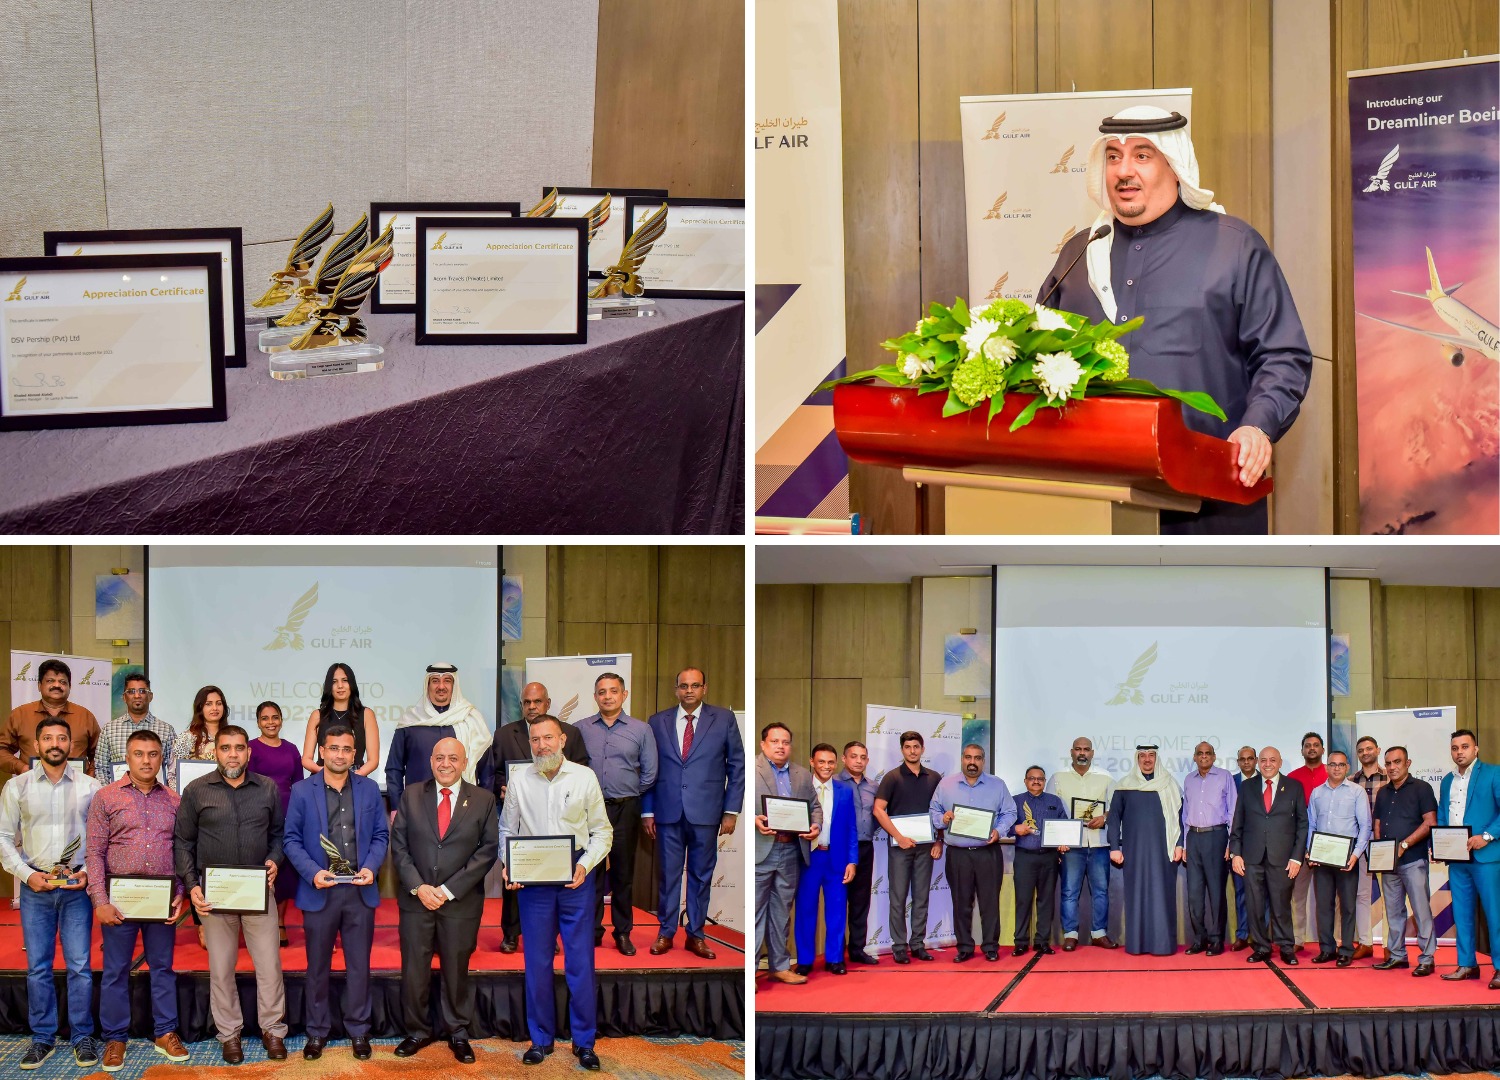 Gulf Air Awards Night: Celebrating Excellence and Partnerships